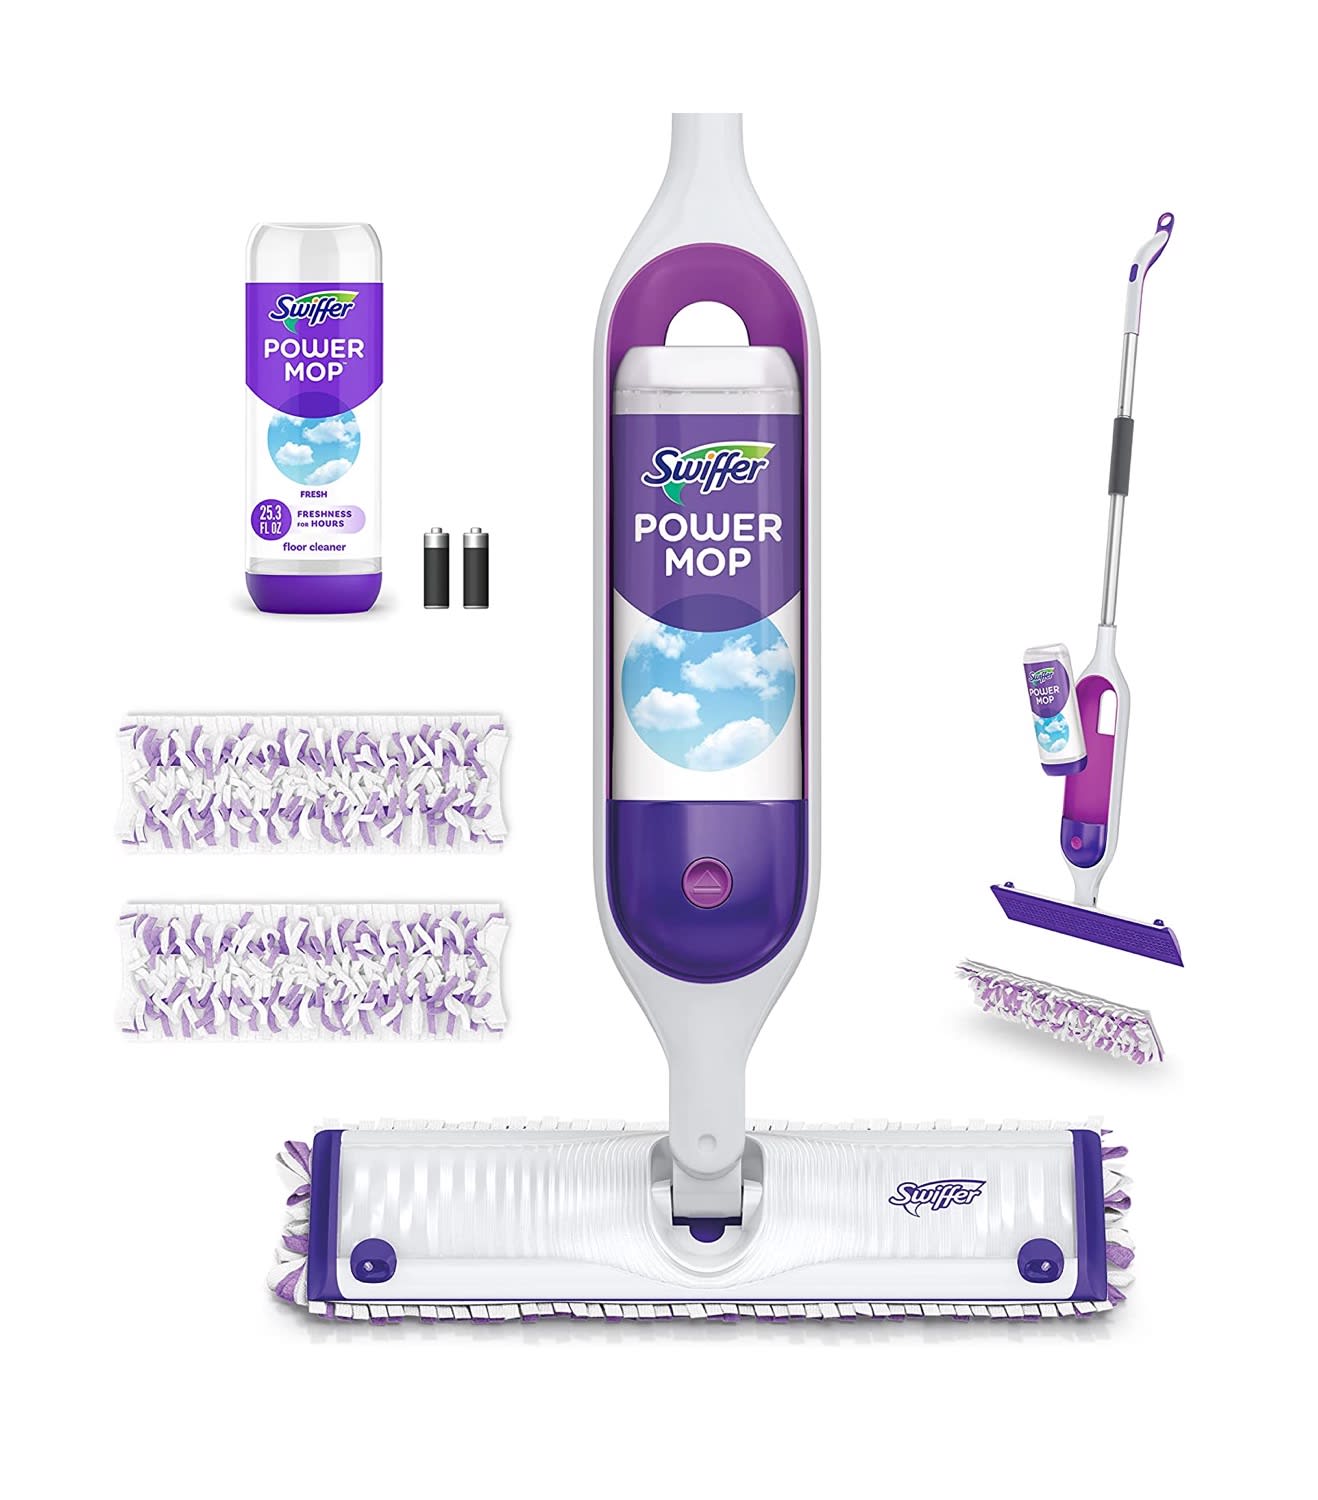 Swiffer WetJet gives a great clean on any floor